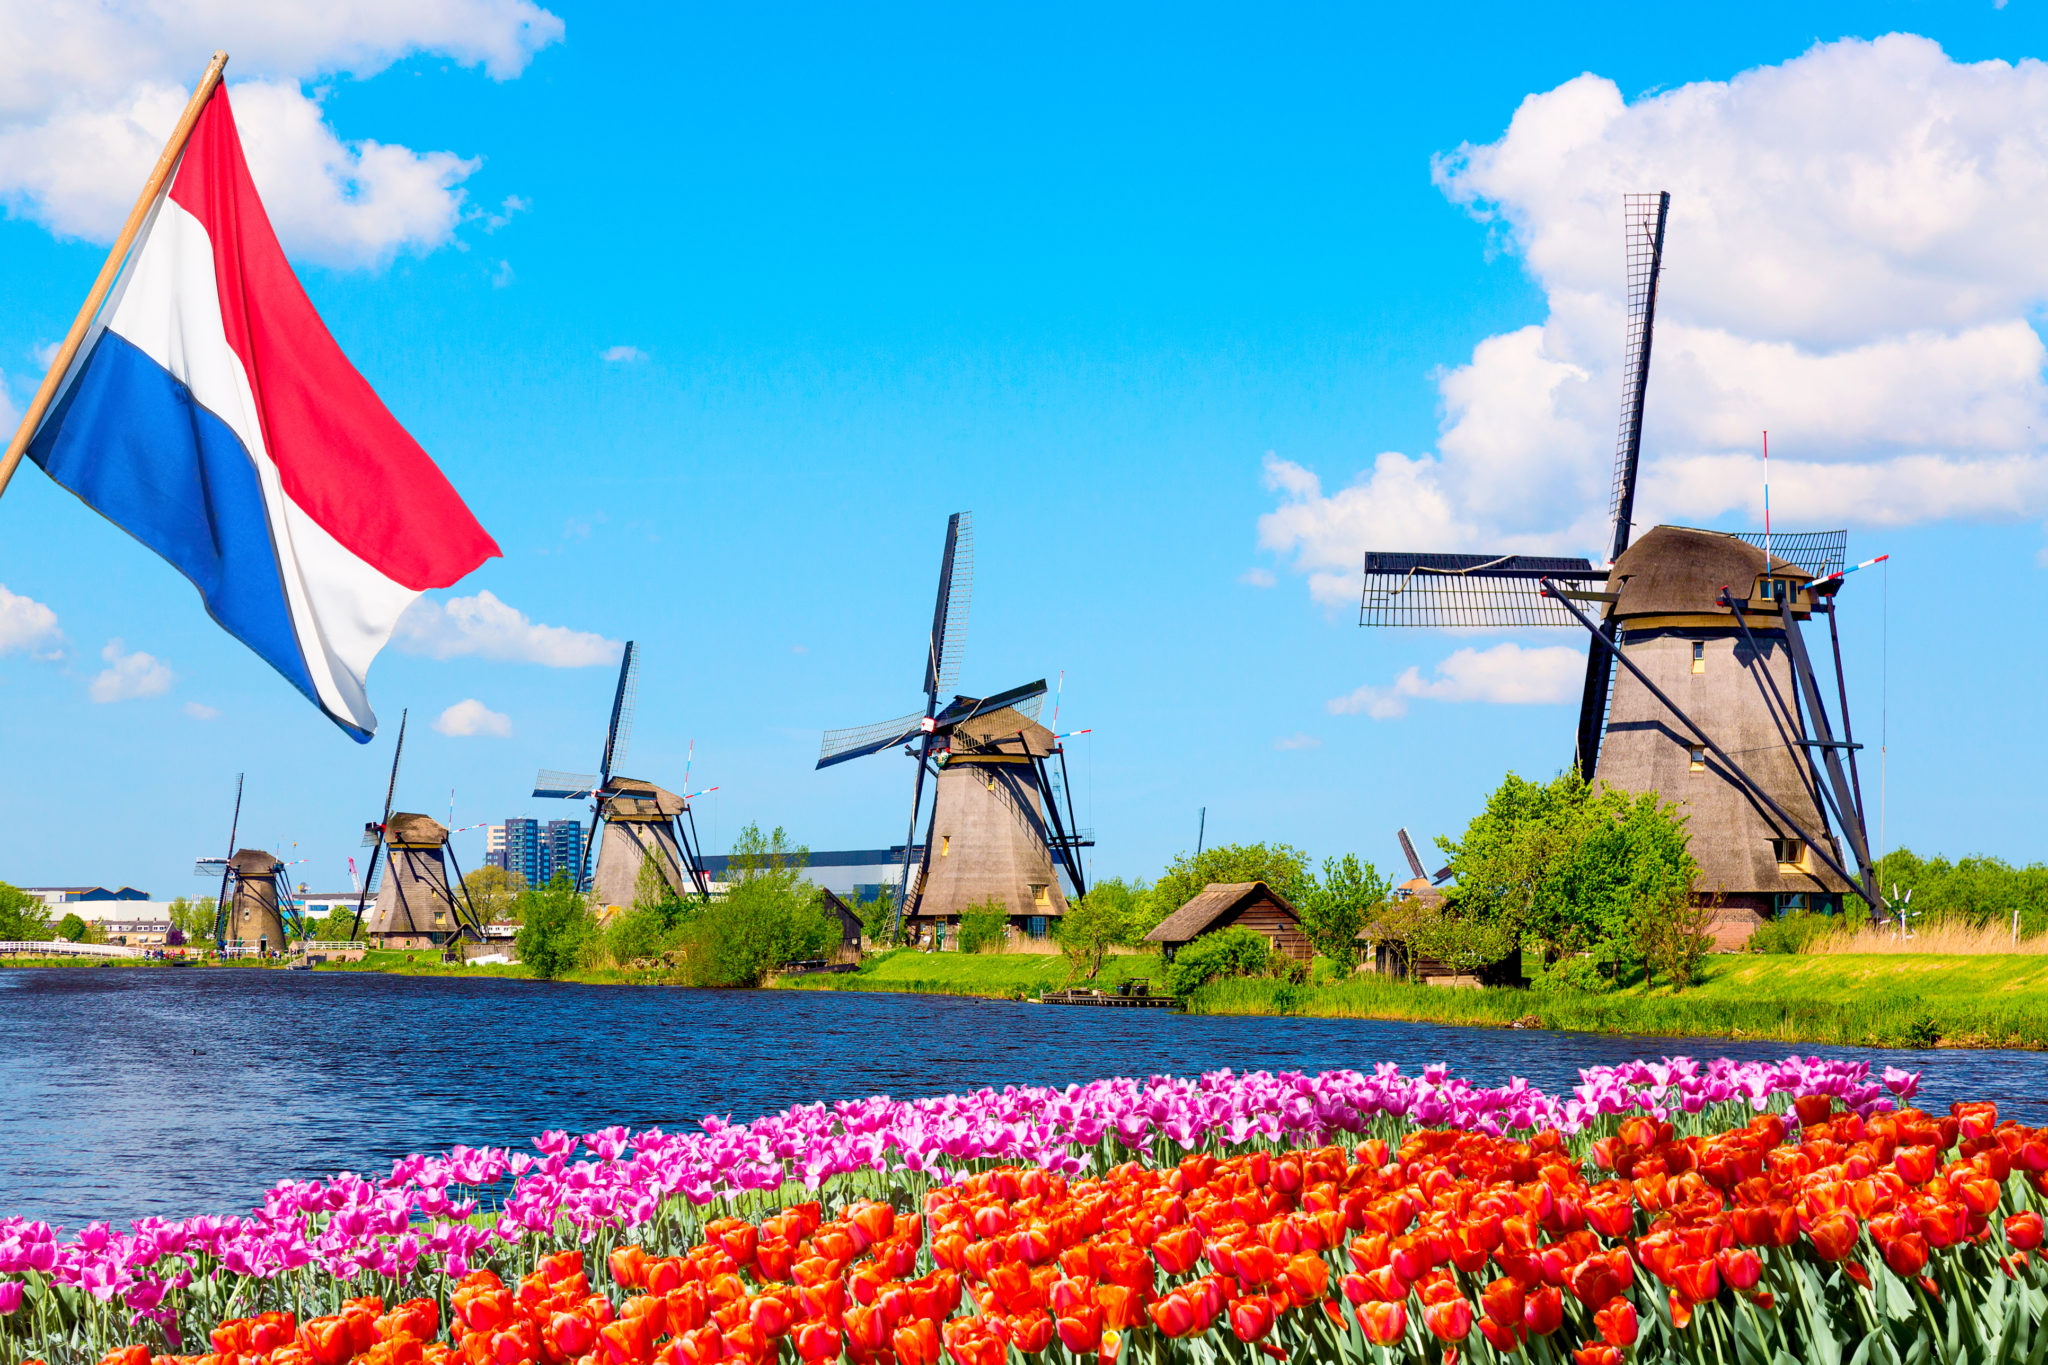 travel insurance companies in netherlands